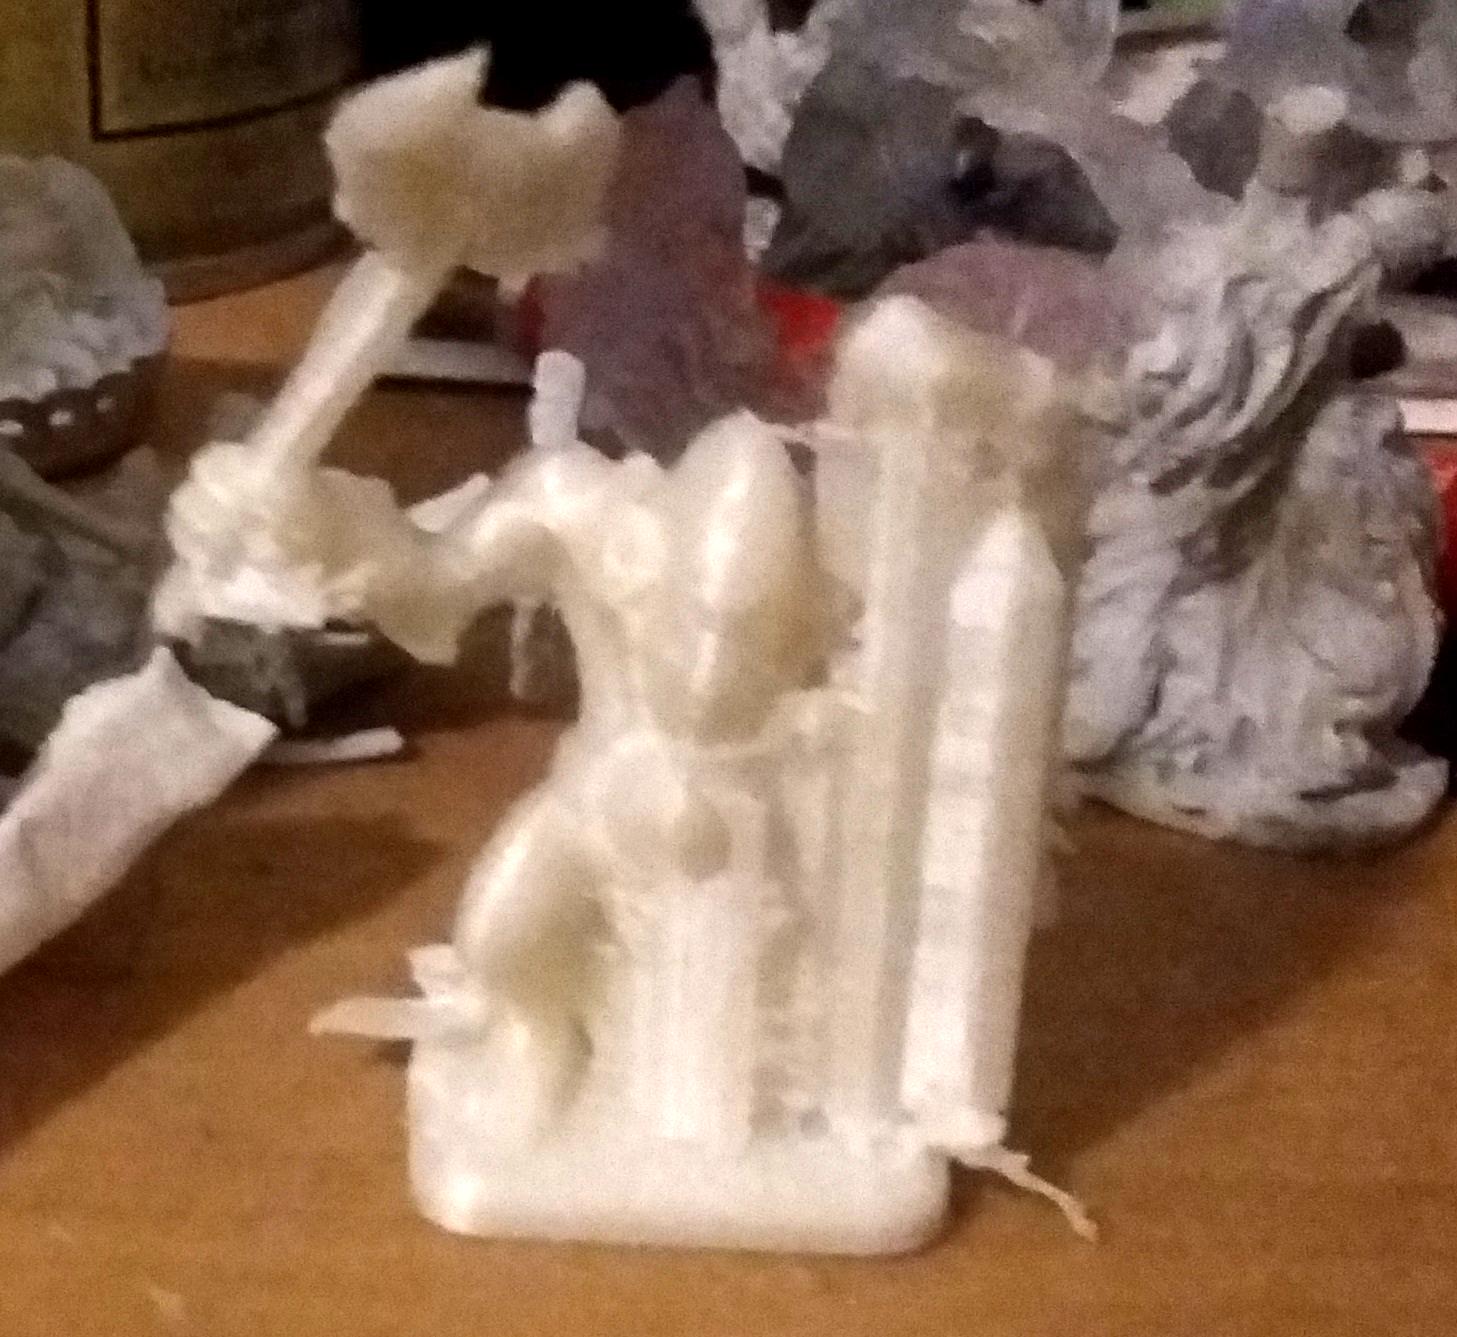 Fimir 3D print with supports